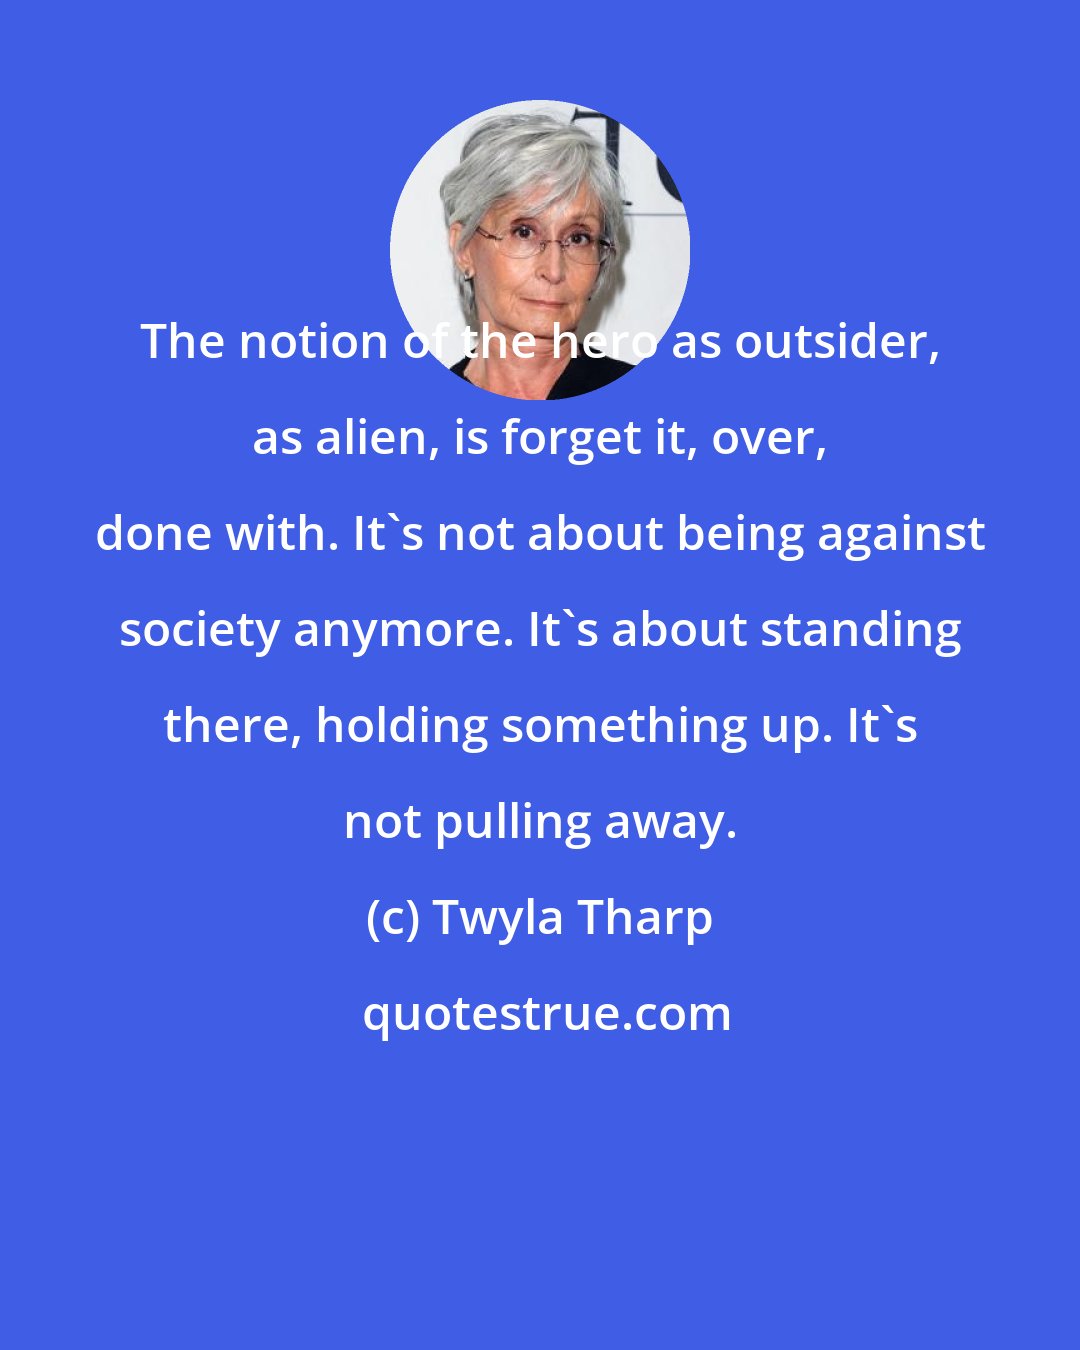 Twyla Tharp: The notion of the hero as outsider, as alien, is forget it, over, done with. It's not about being against society anymore. It's about standing there, holding something up. It's not pulling away.